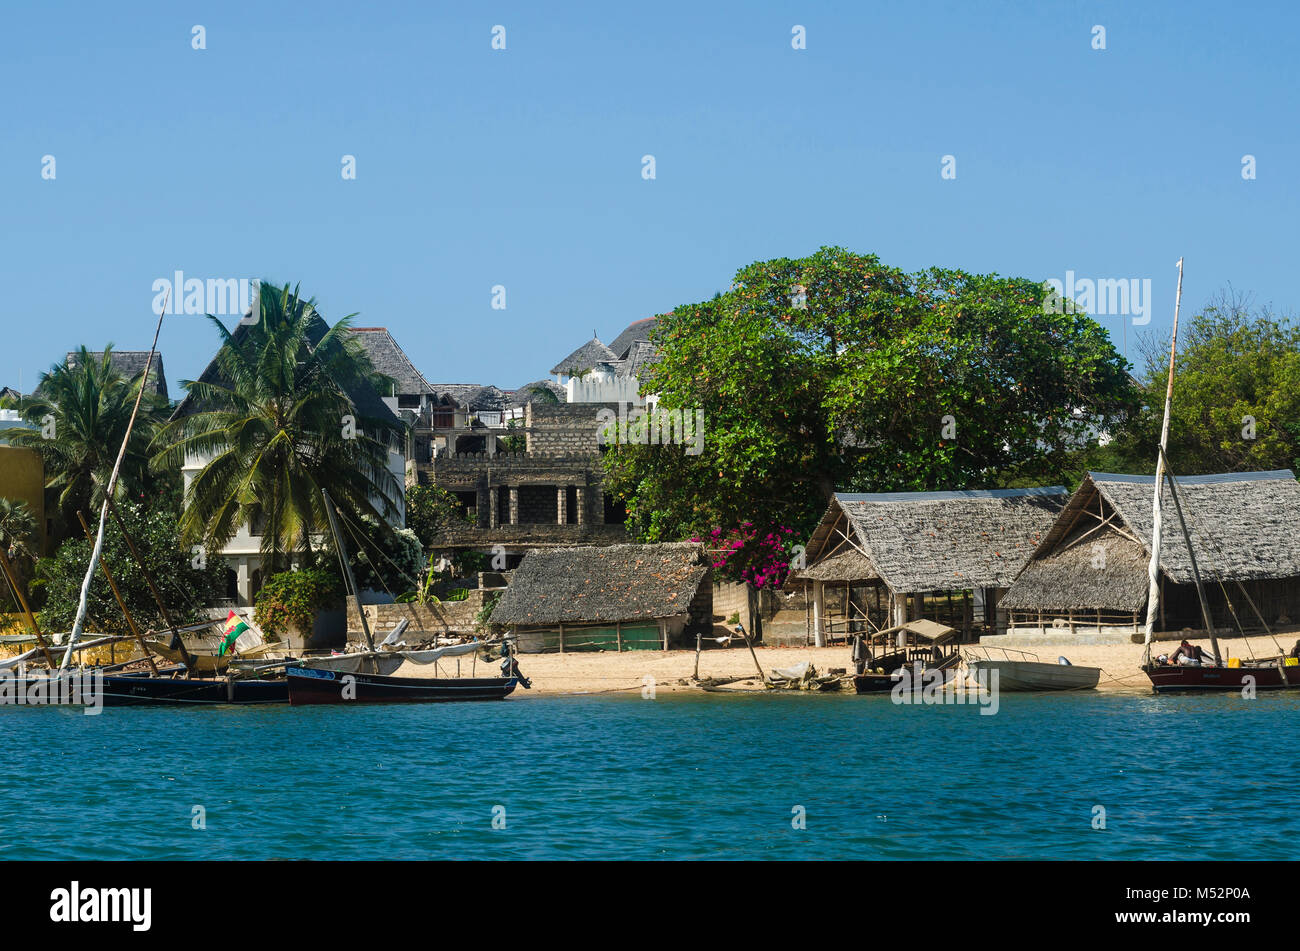 Traditional Swahili-style home on the Lamu Island waterfront, with boats at anchor in the water in front of it. Kenya, East Africa. Stock Photo